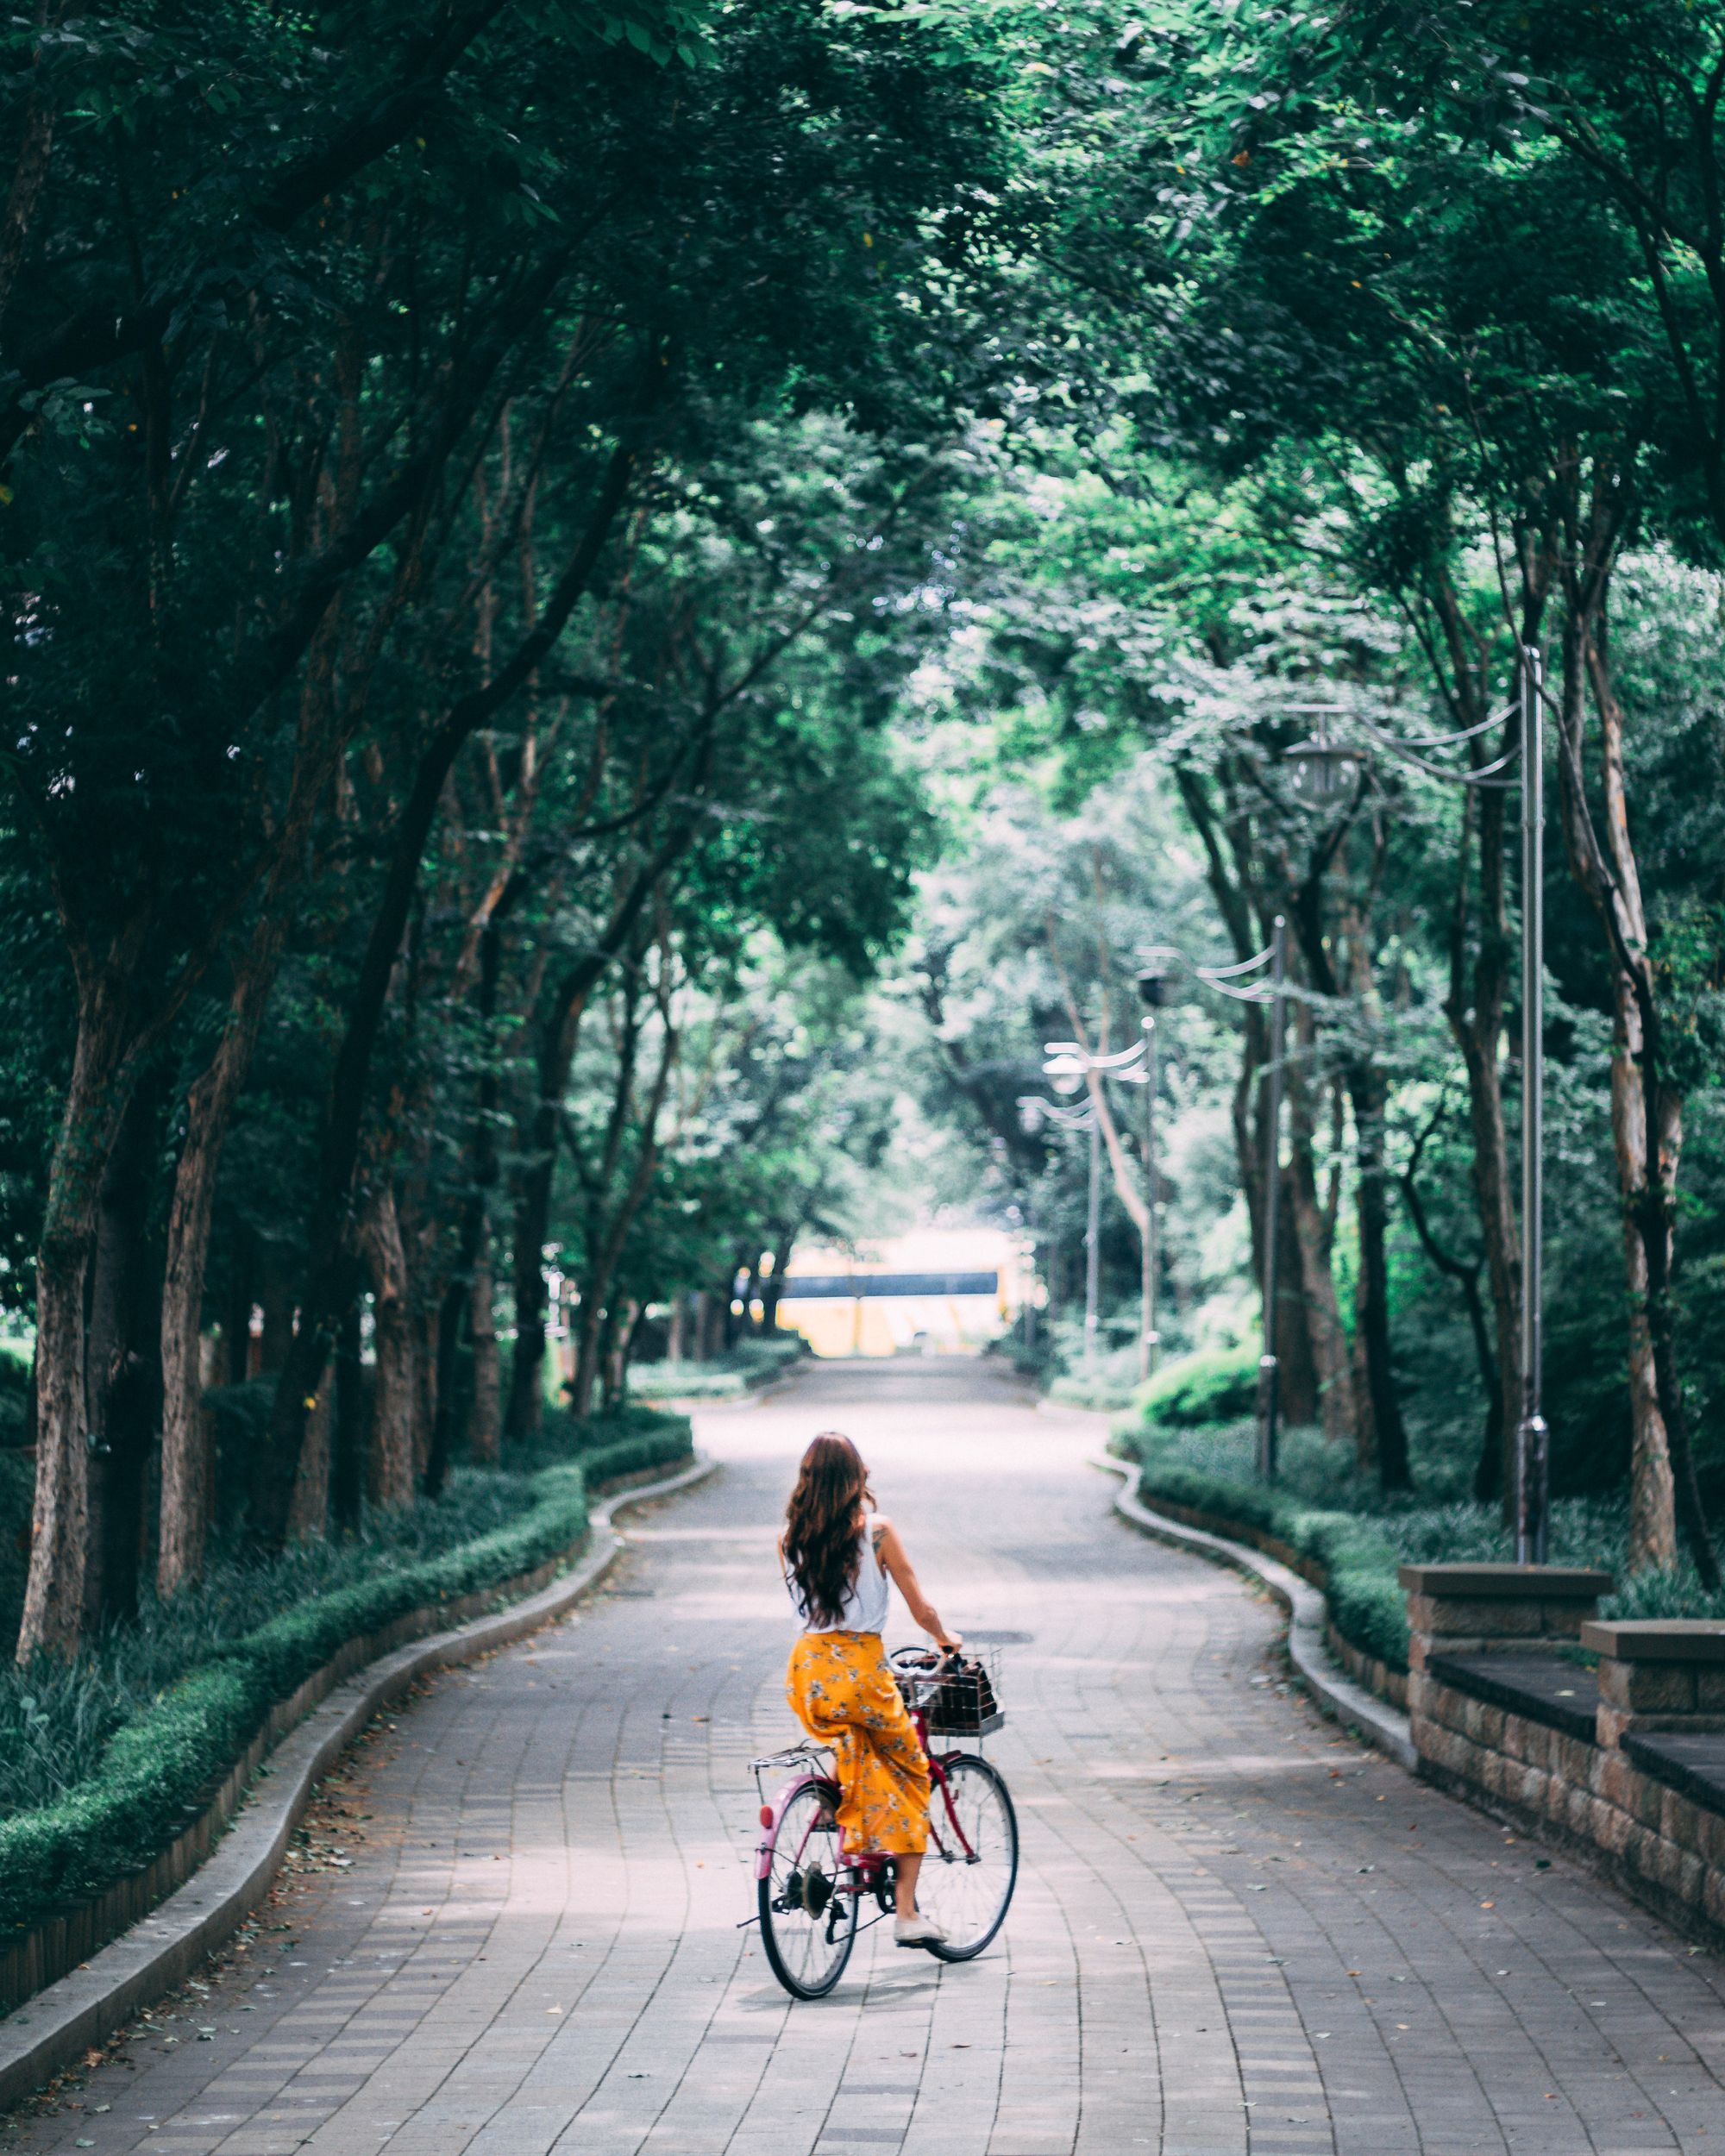 Woman riding bike on curving, tree-lined pathway in city